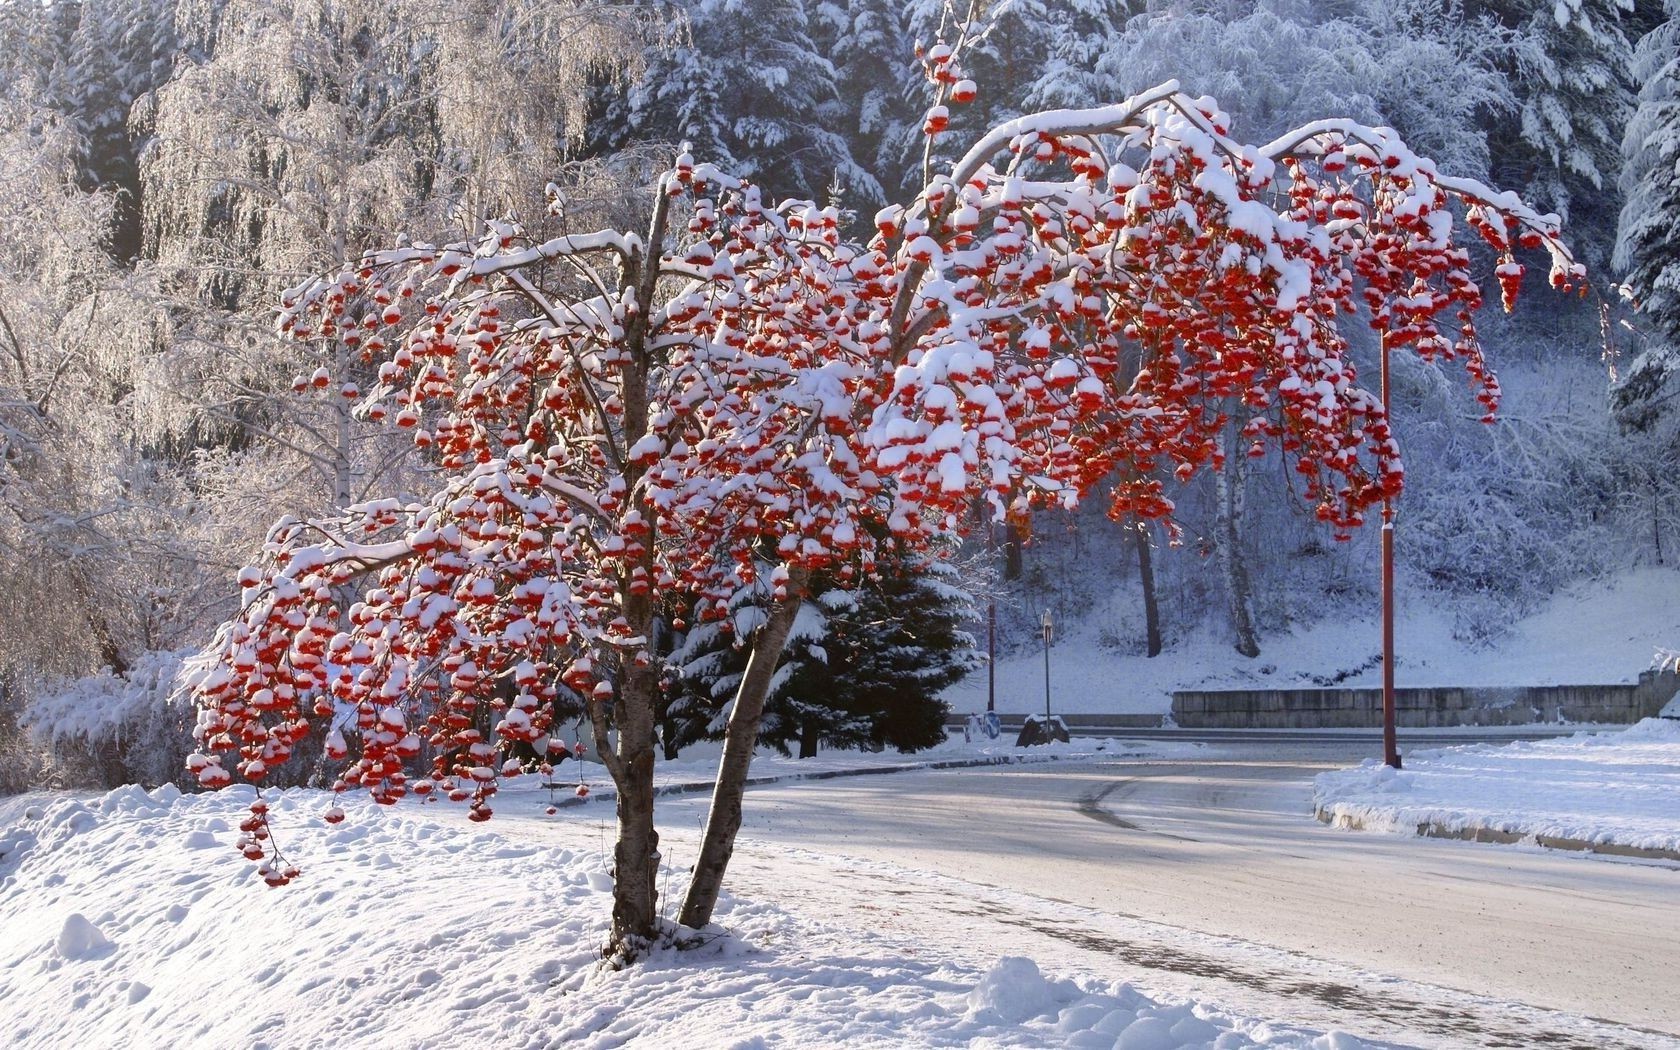 trees snow winter season frost tree cold landscape ice weather nature frozen branch outdoors wood frosty snow-white scenic scene scenery